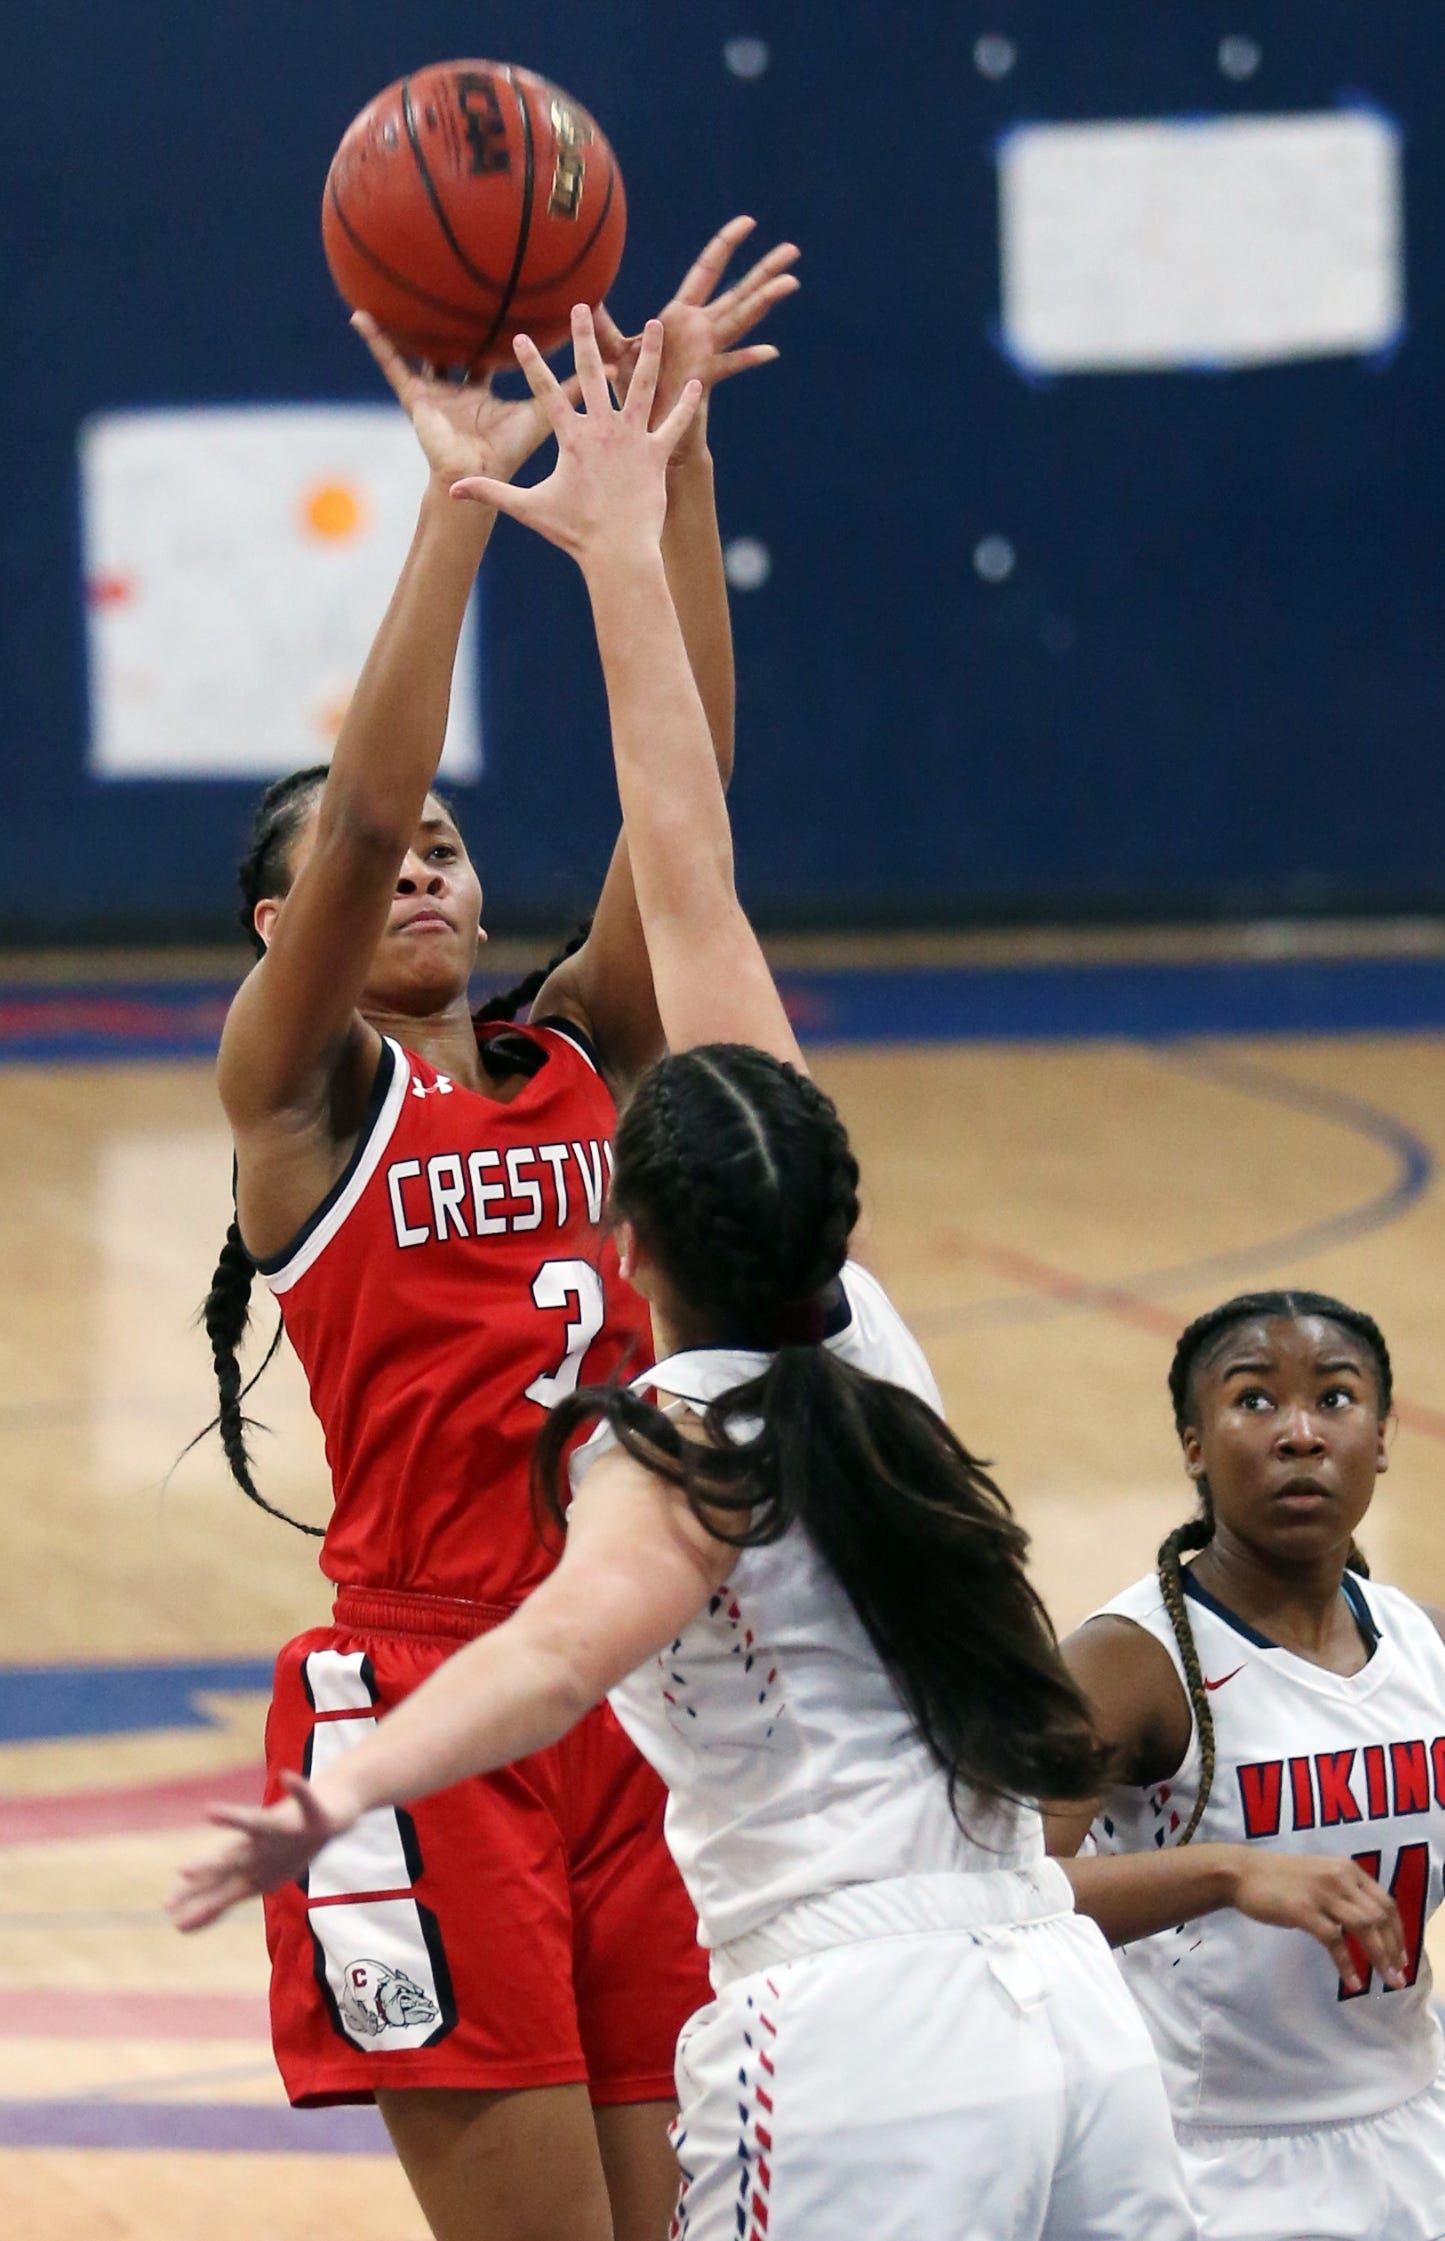 Crestview's Marissa Brown puts up a shot over Fort Walton Beach's Madison Seiuli during the Lady Bulldogs win over the Lady Vikings at Fort Walton Beach. [FILE PHOTO]